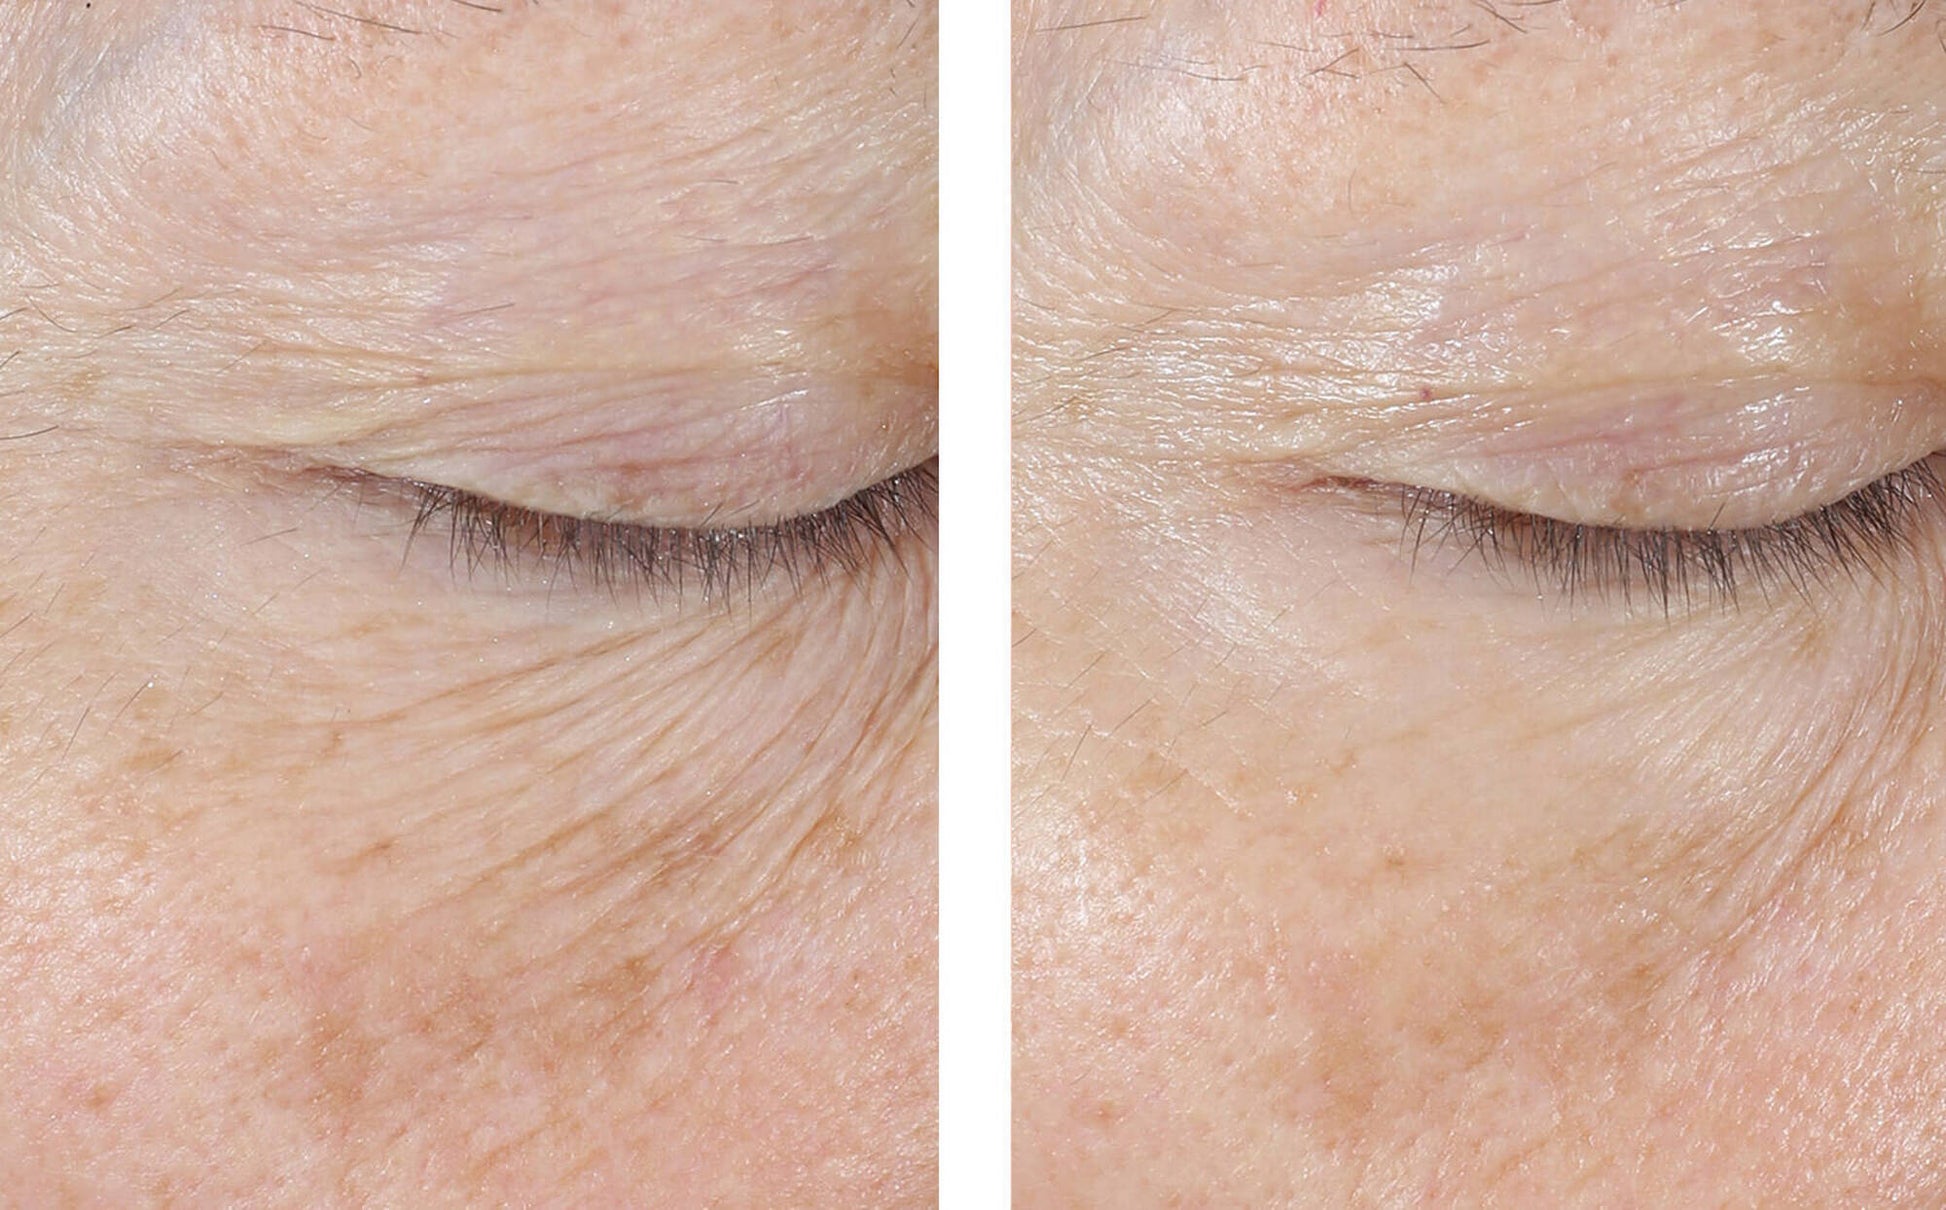 skinbetter interfuse eye cream before and after 4 weeks